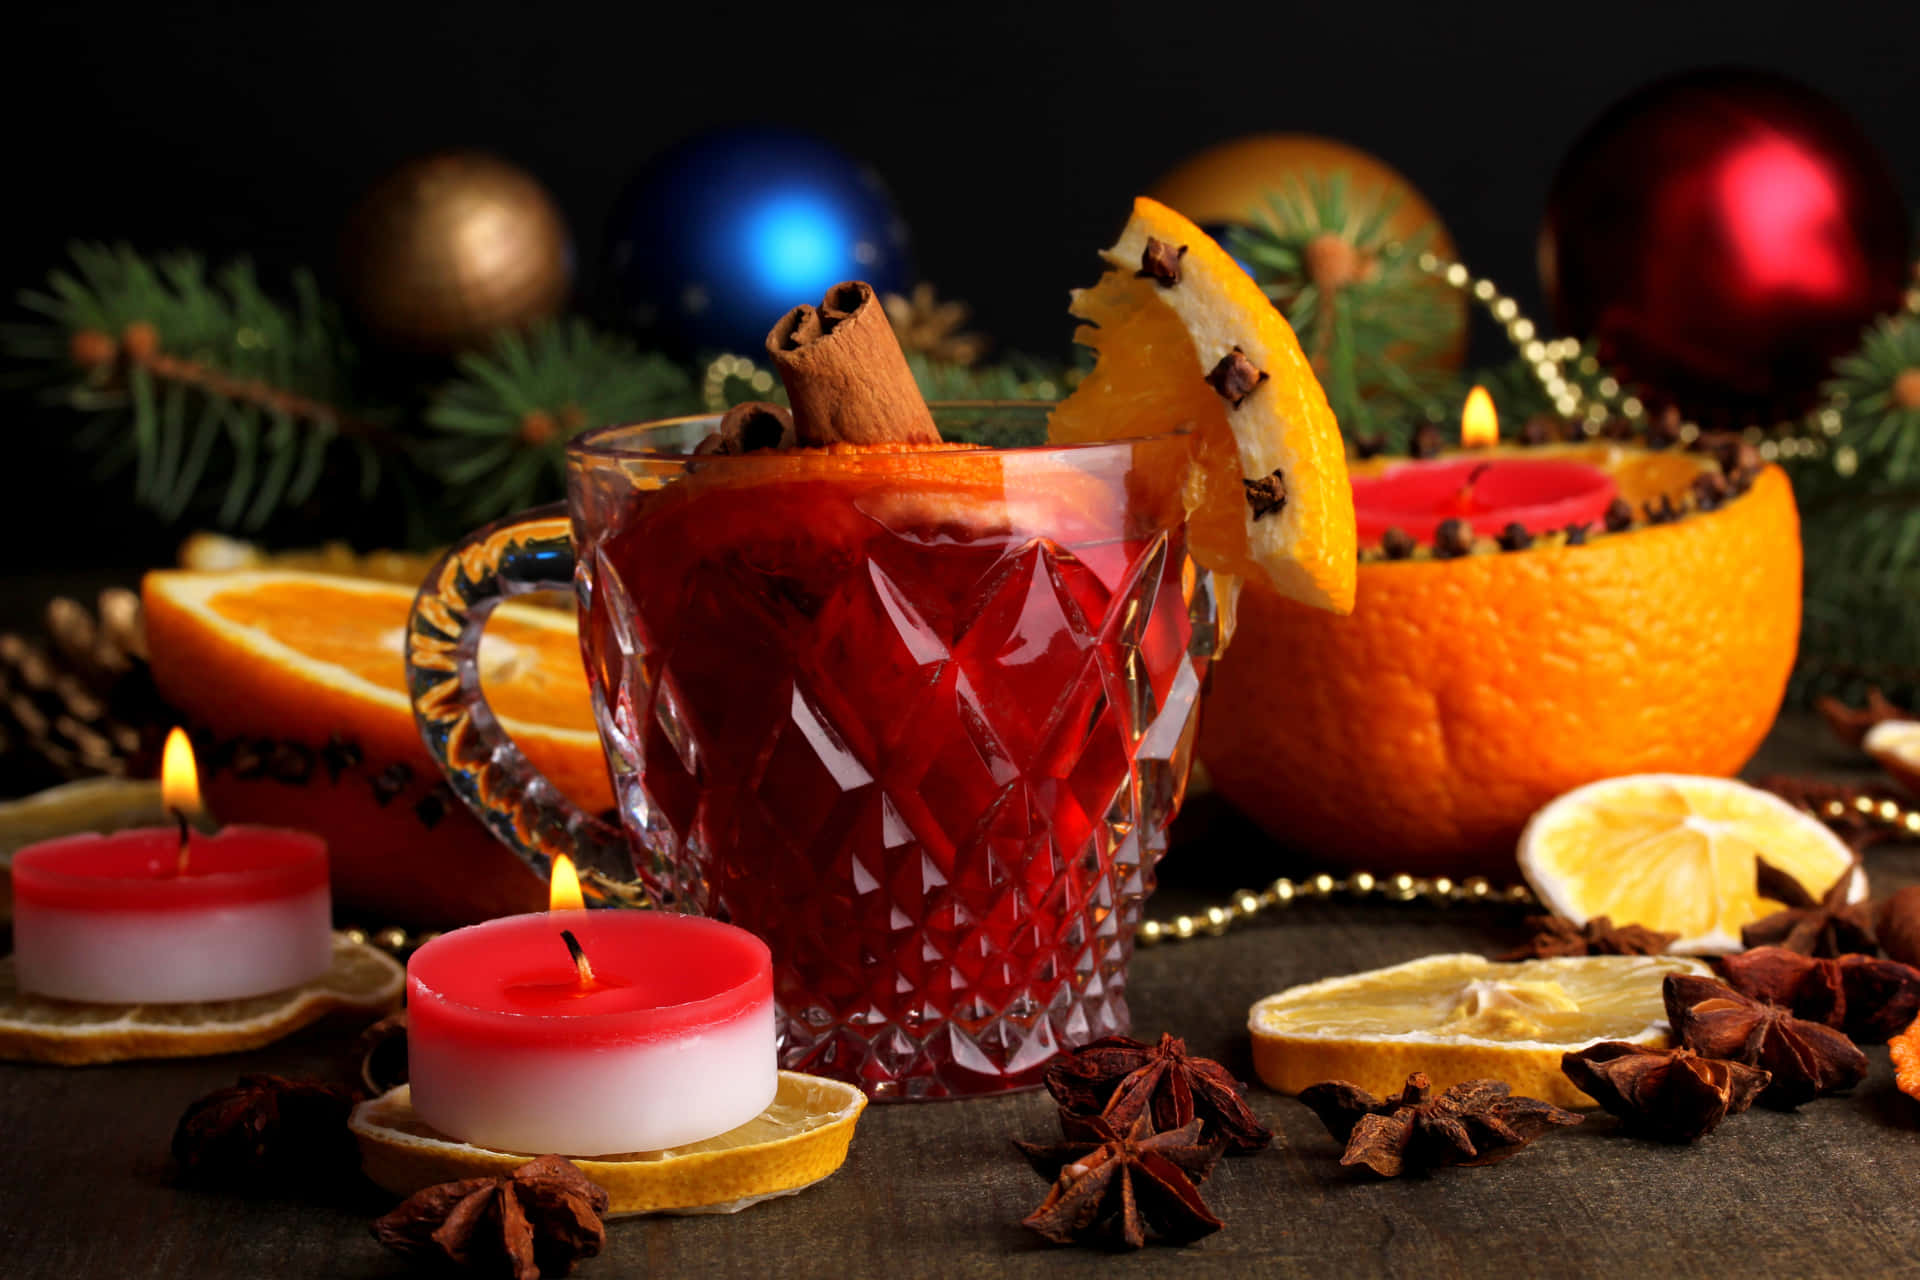 A Warm and Inviting Glass of Mulled Wine Wallpaper